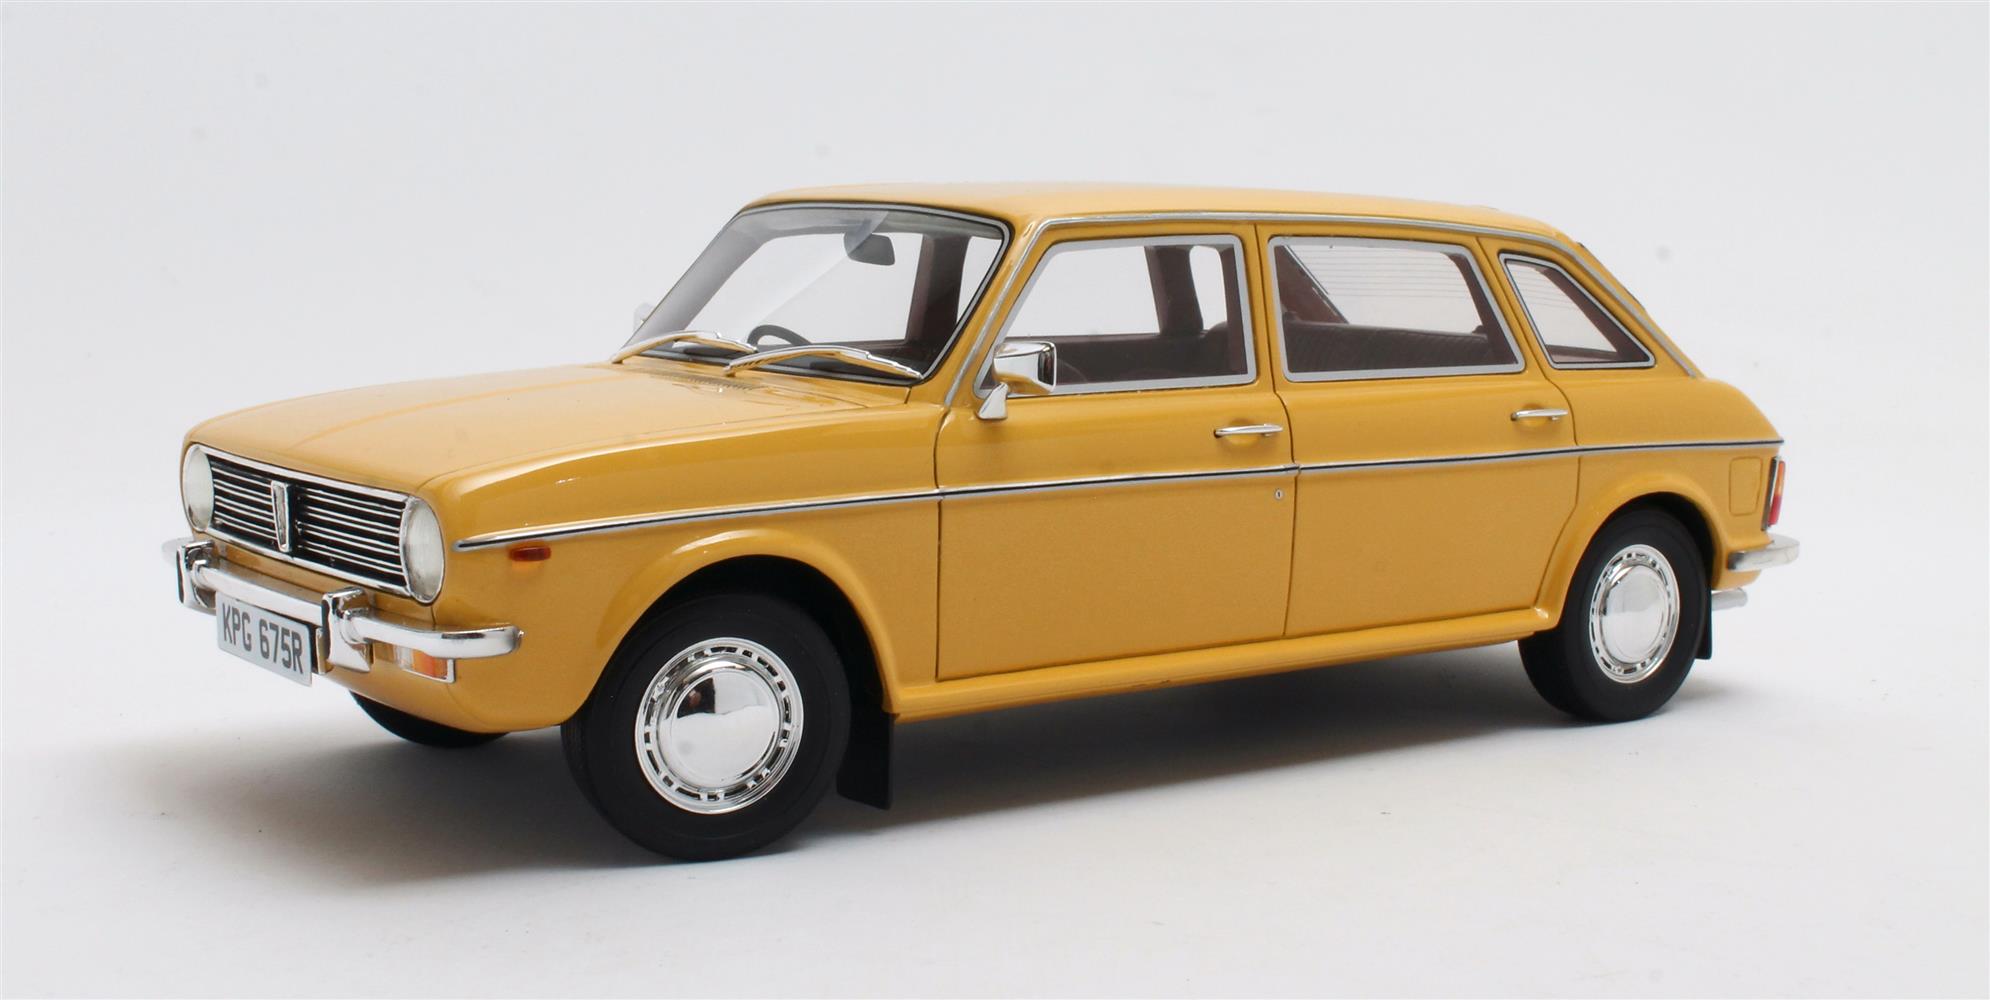 Austin Maxi 1750 sand glow yellow 1971-1979 1:18 Cult Scale Models